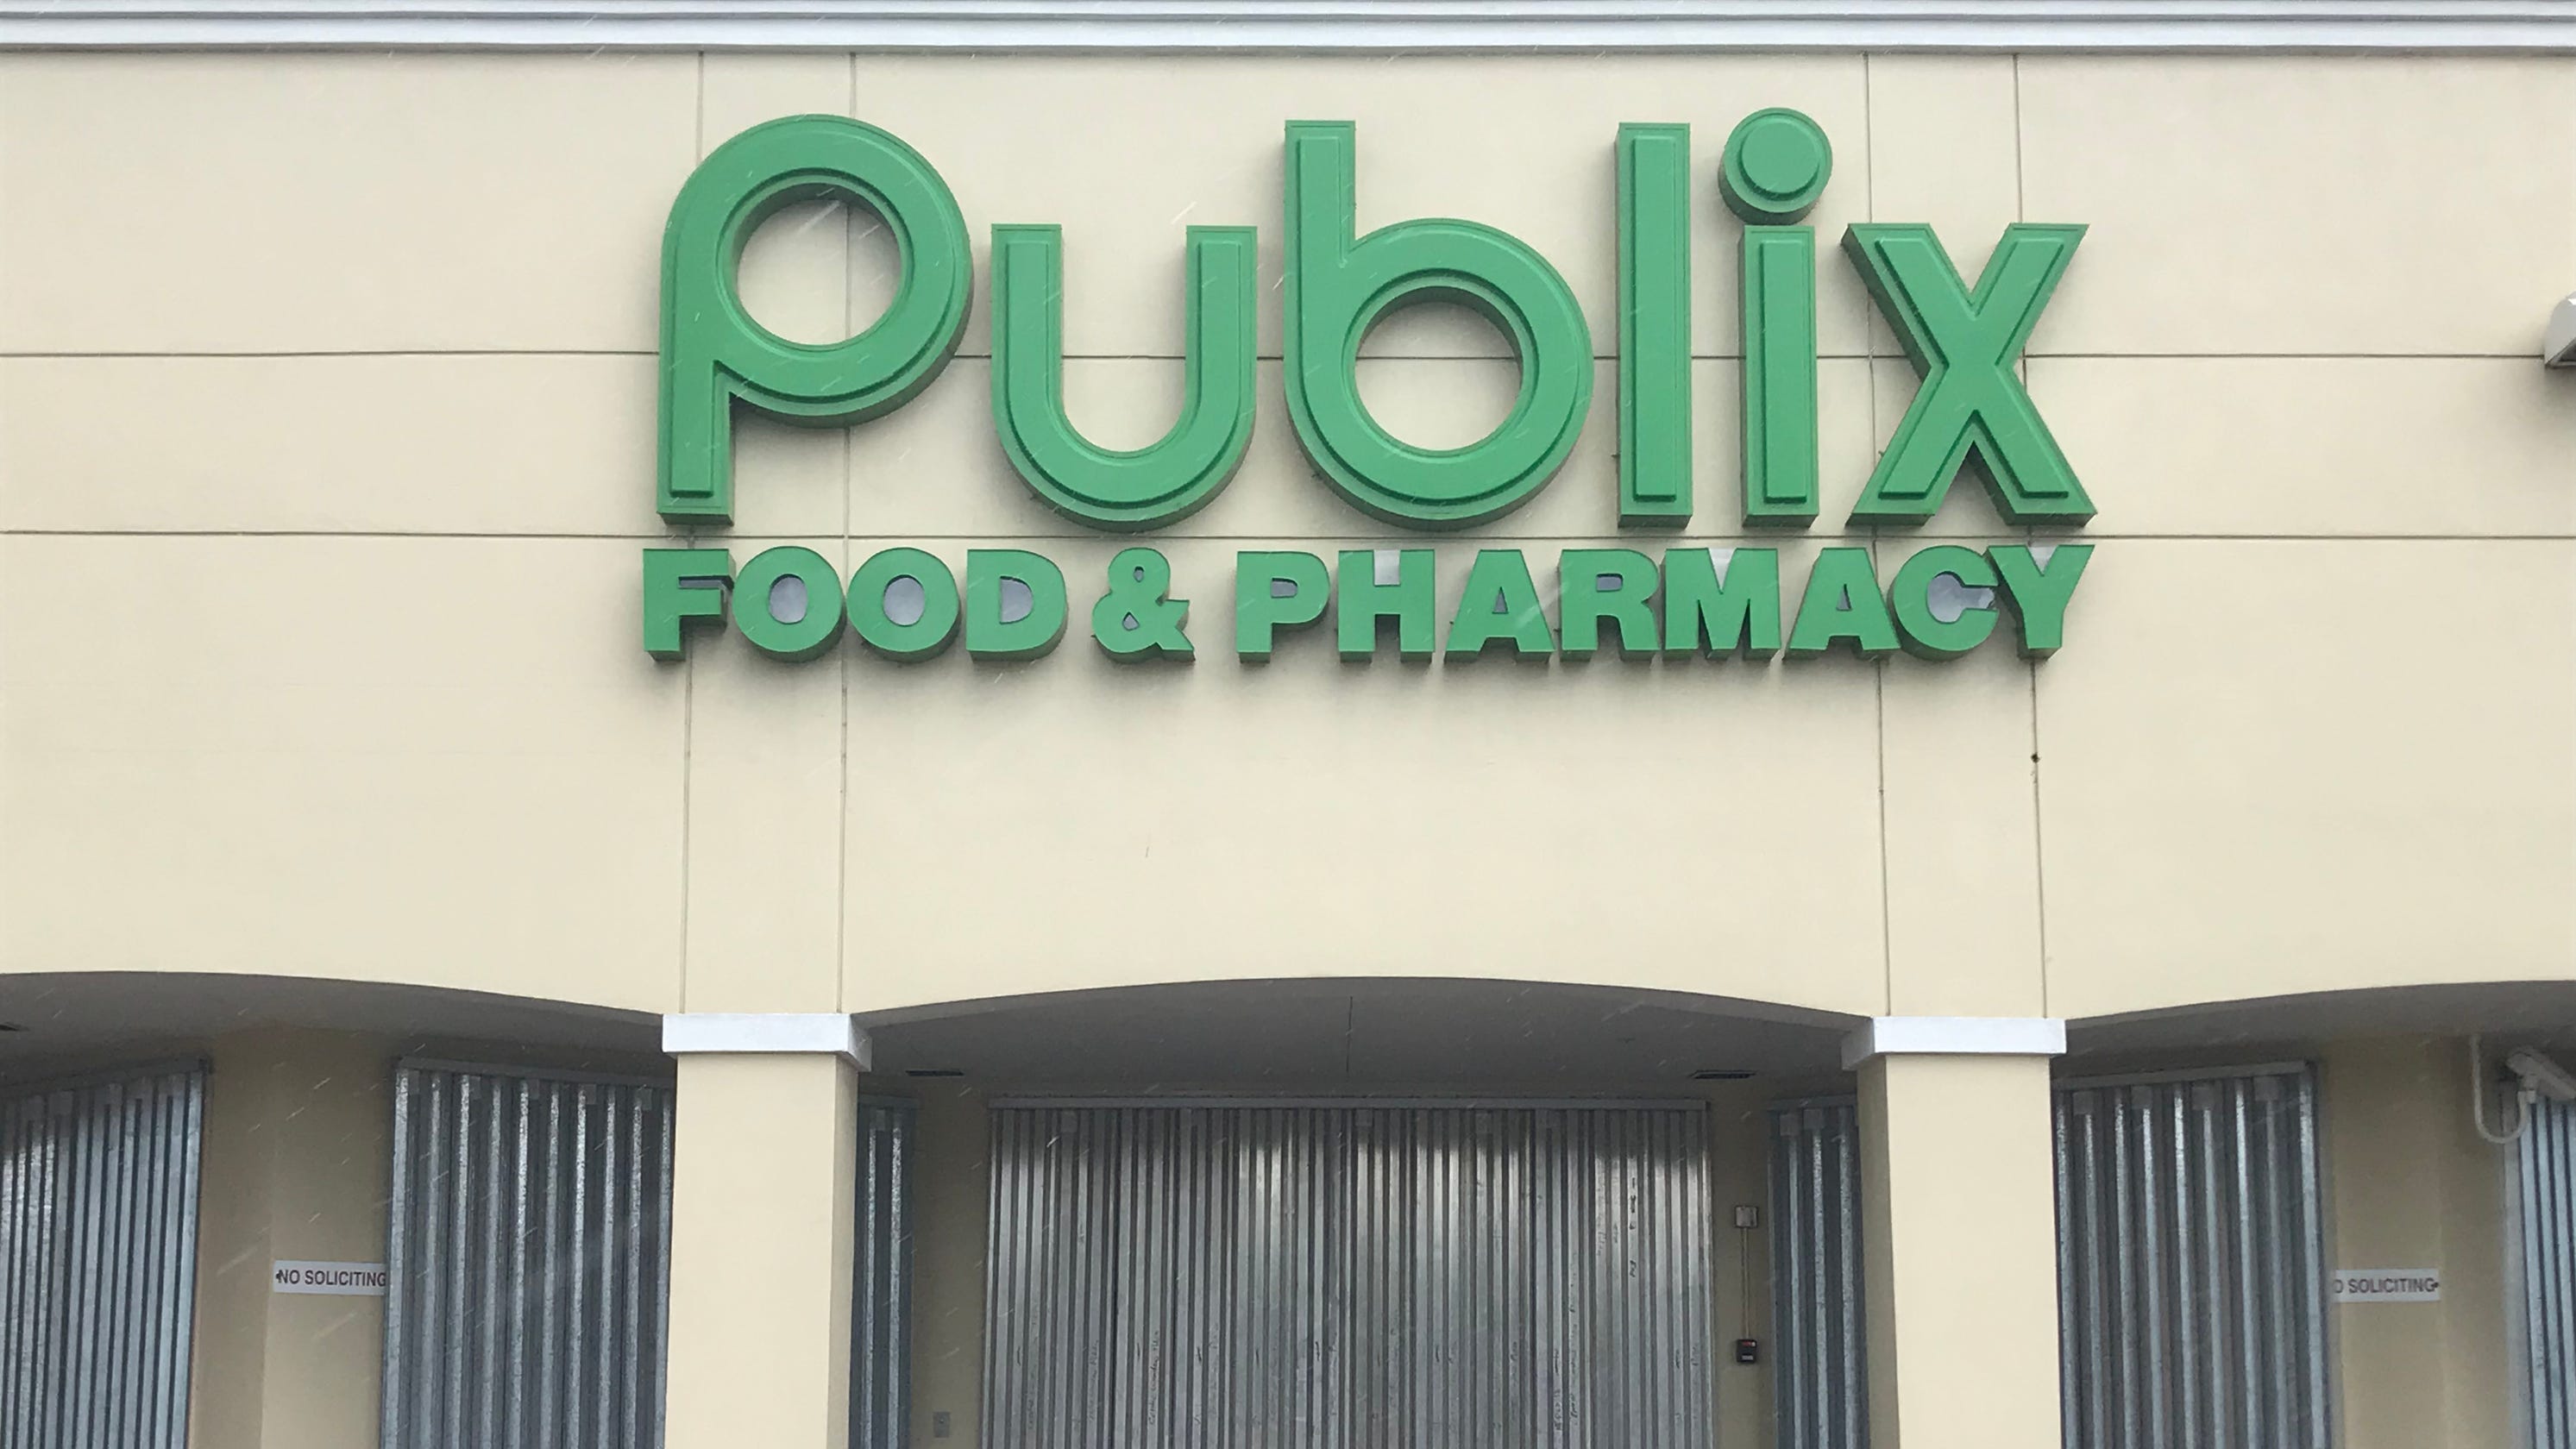 Publix Shopping Center 11 New Retail Shops Coming To Beulah In 2021